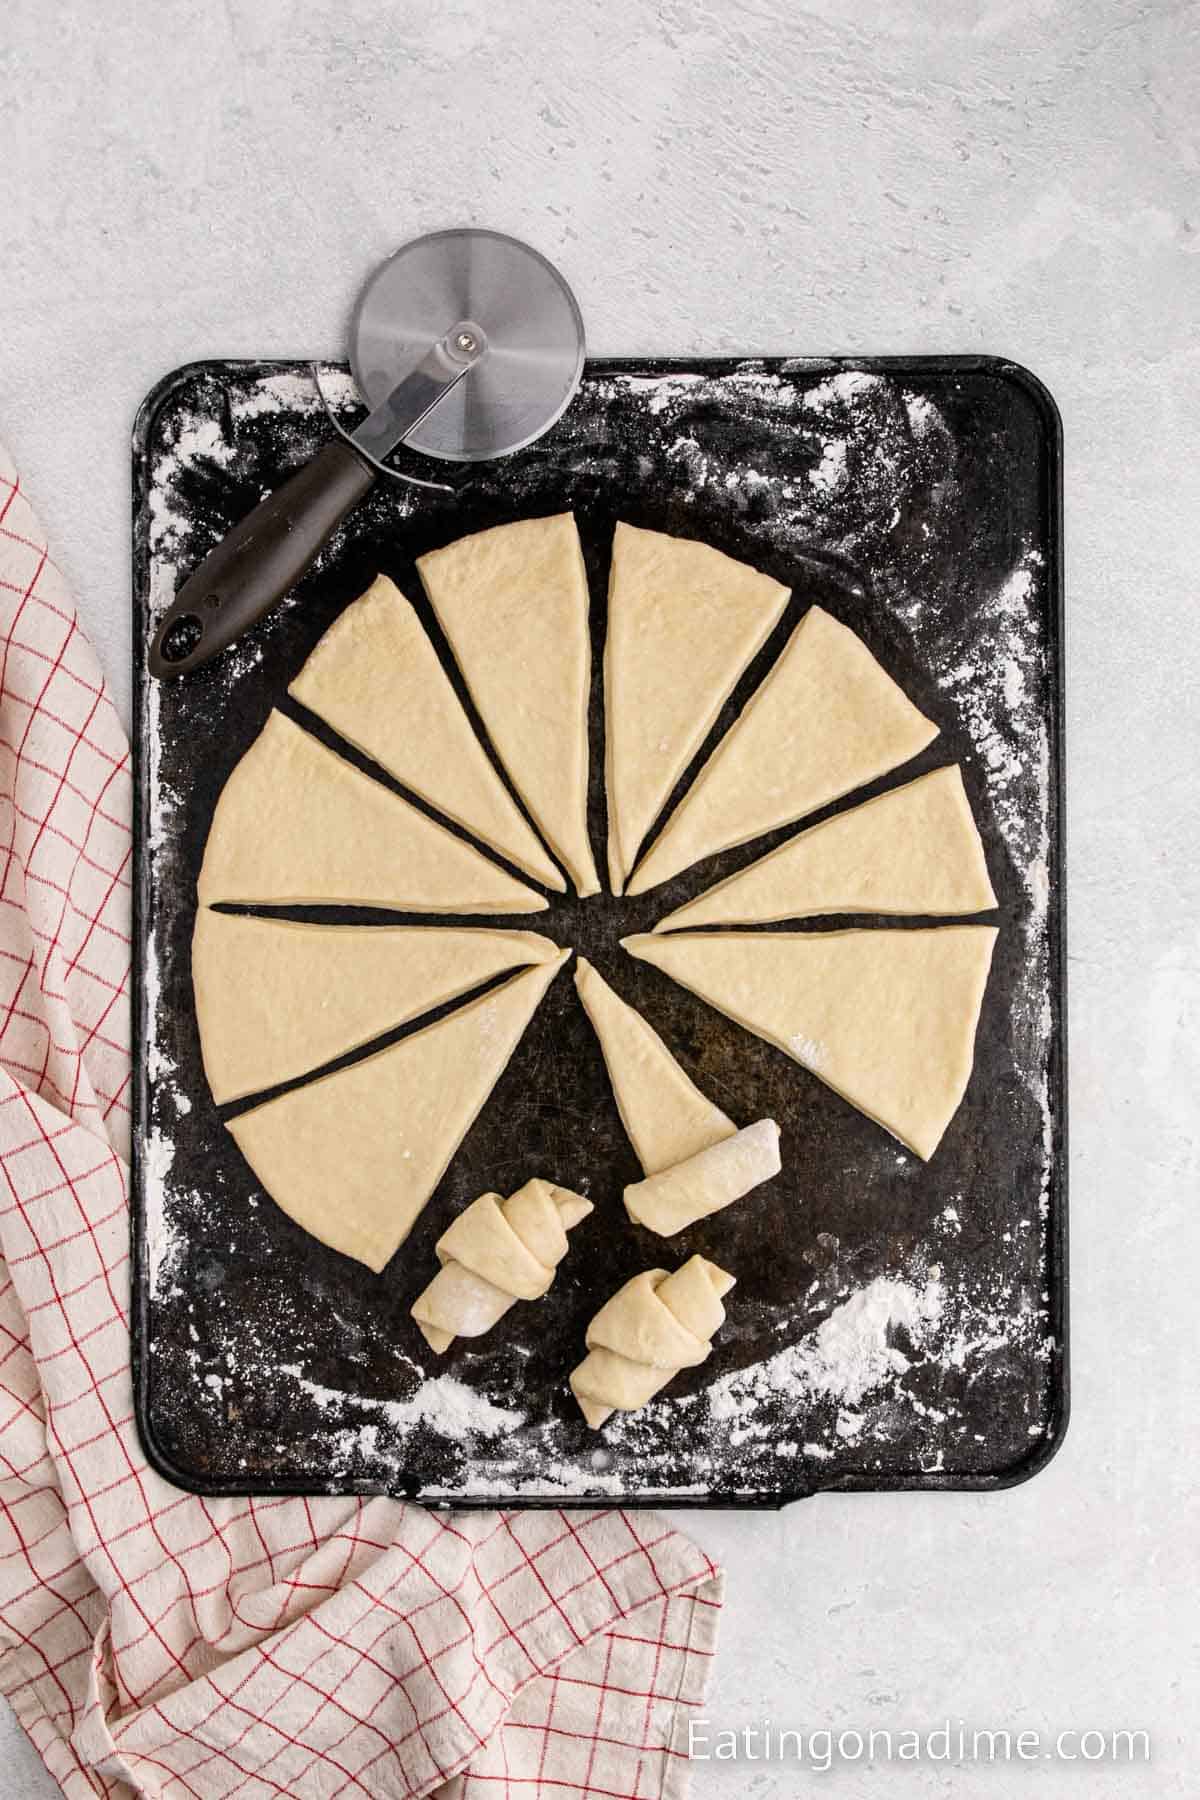 Rolling the triangle shaped dough on a floured surface